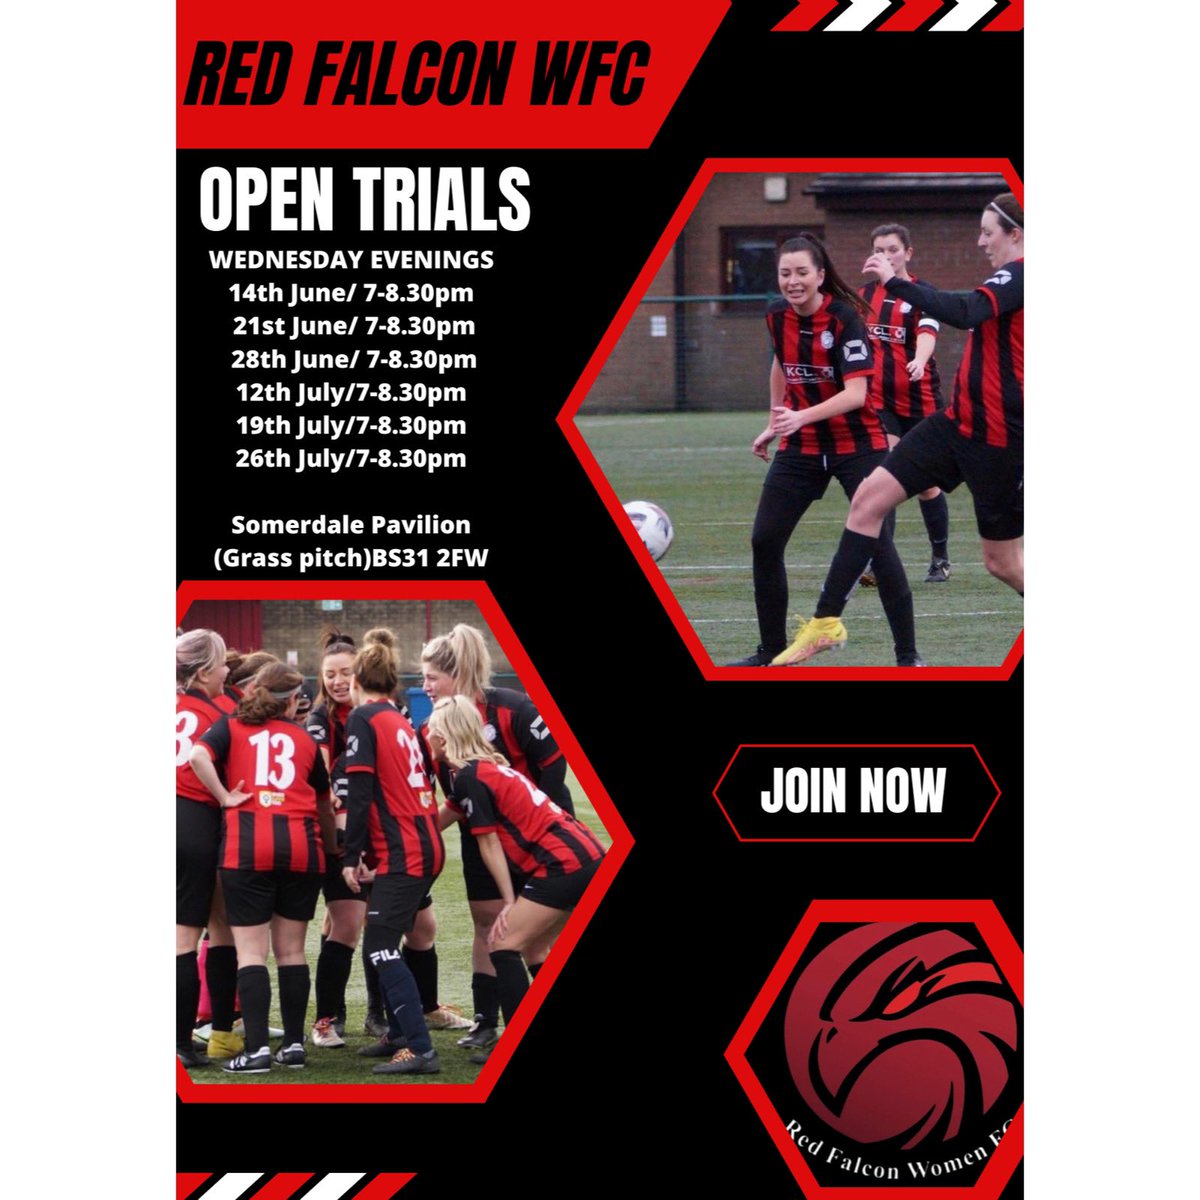 🚨NEW PLAYERS WANTED🚨 Our season is over and we are on the hunt for some new players to add to our fantastic squad! Send us a message if you are interested! 📧 redfalconwfc@outlook.com 📞 07917 762145 #wearerecruiting #newplayerswanted #opentrials #womensfootball